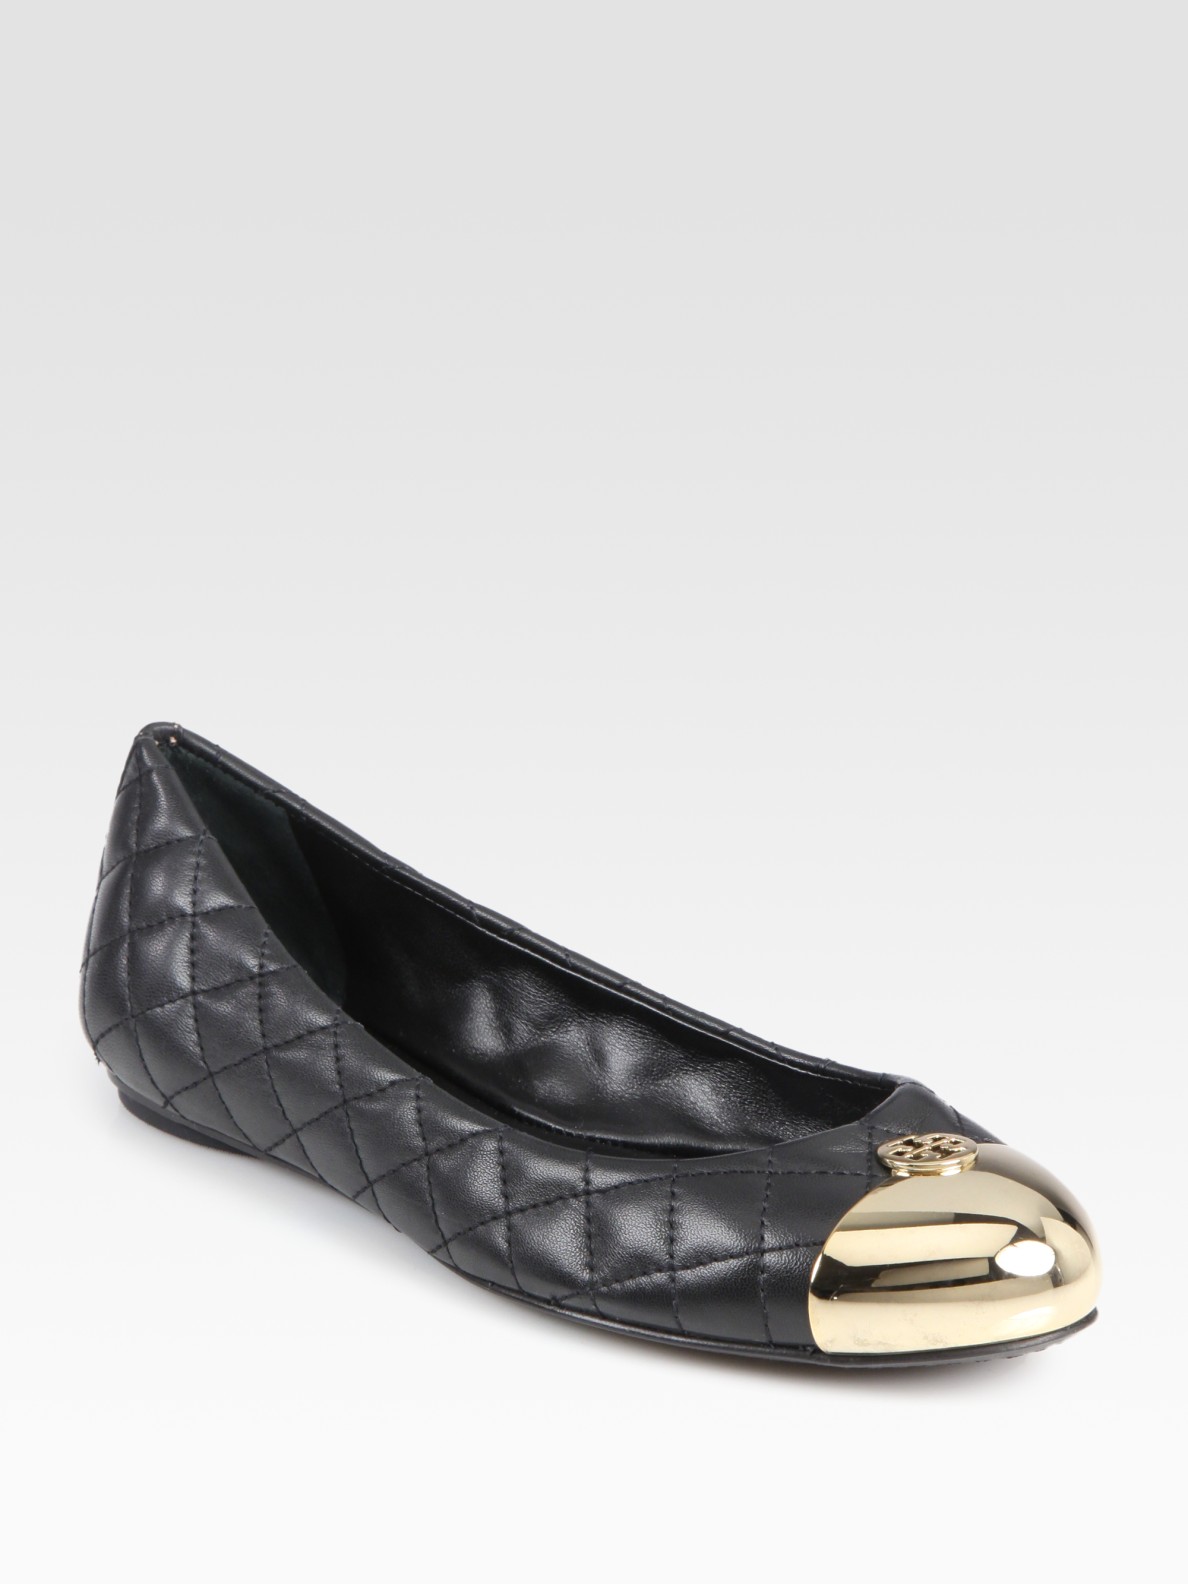 Tory Burch Kaitlin Quilted Leather 